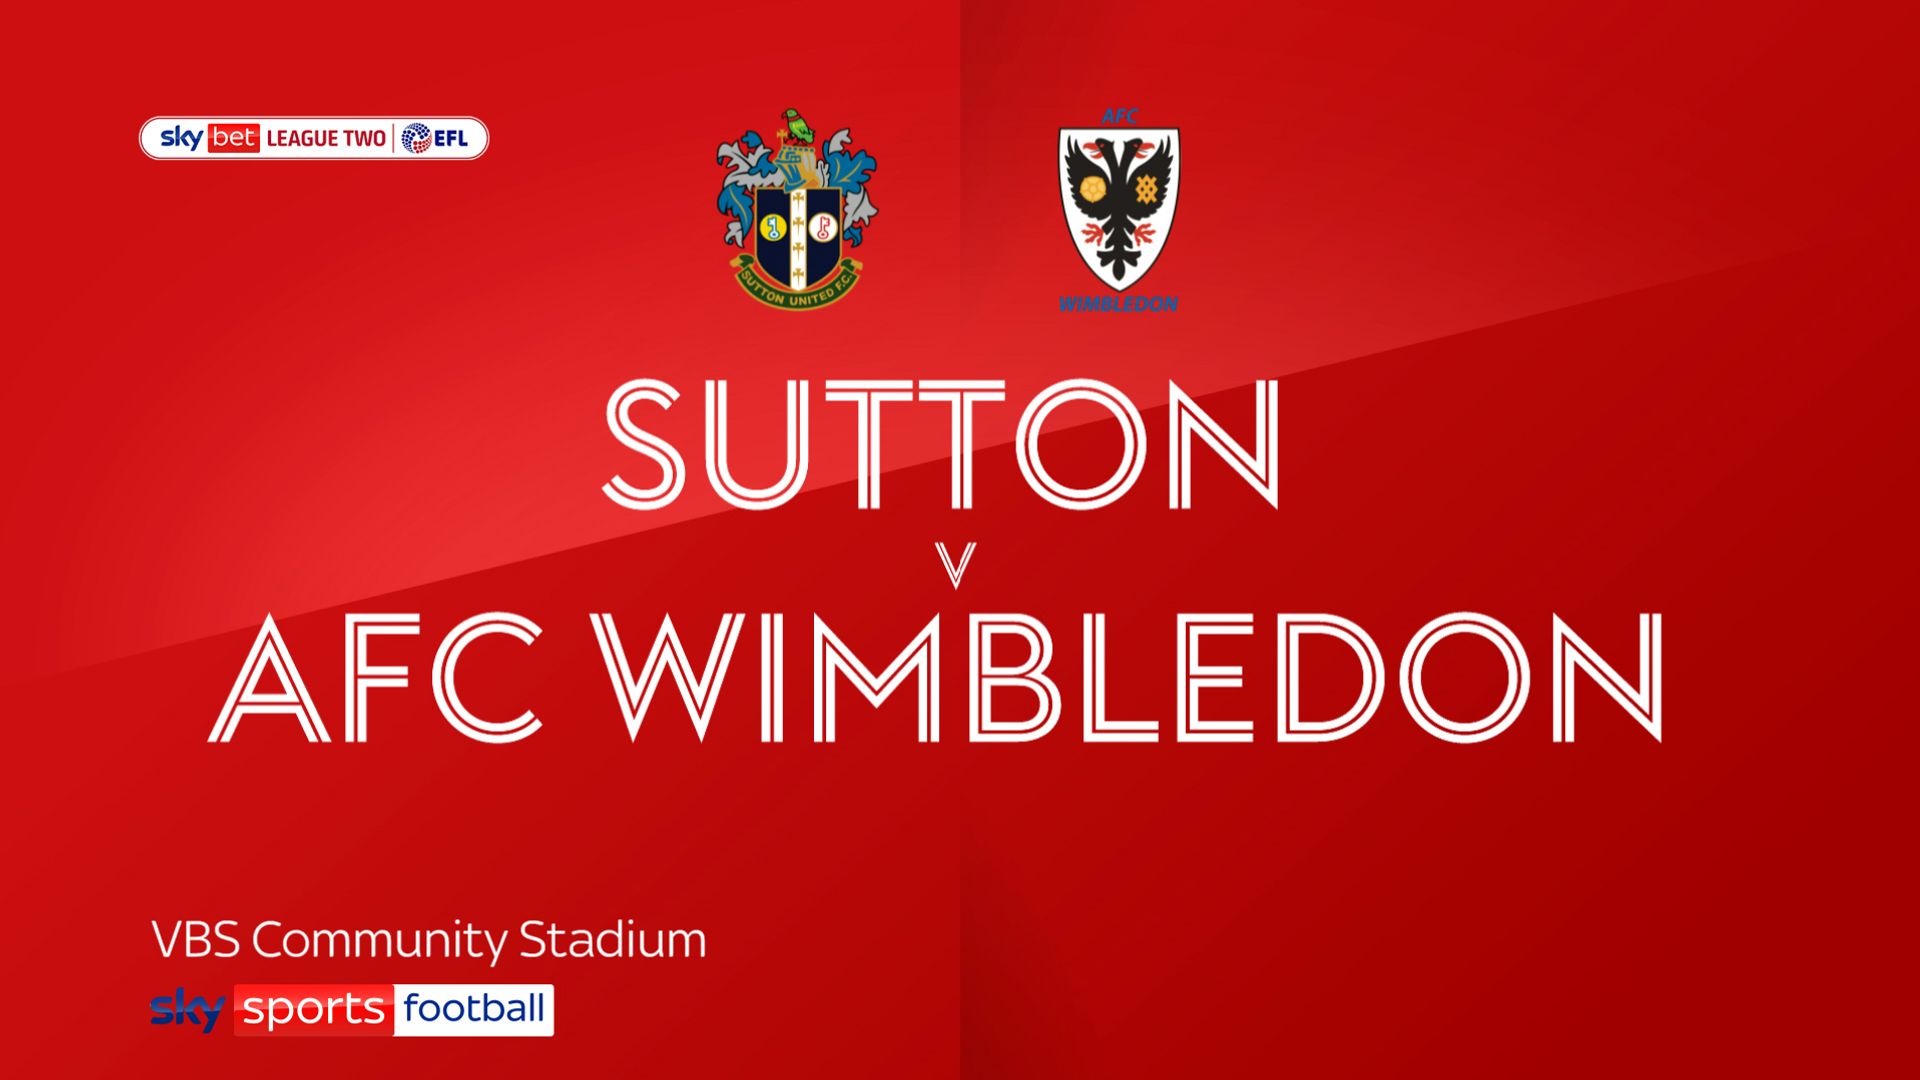 Sutton Utd 2 - 1 Wimbledon - WireFan - Your Source for Social News and ...